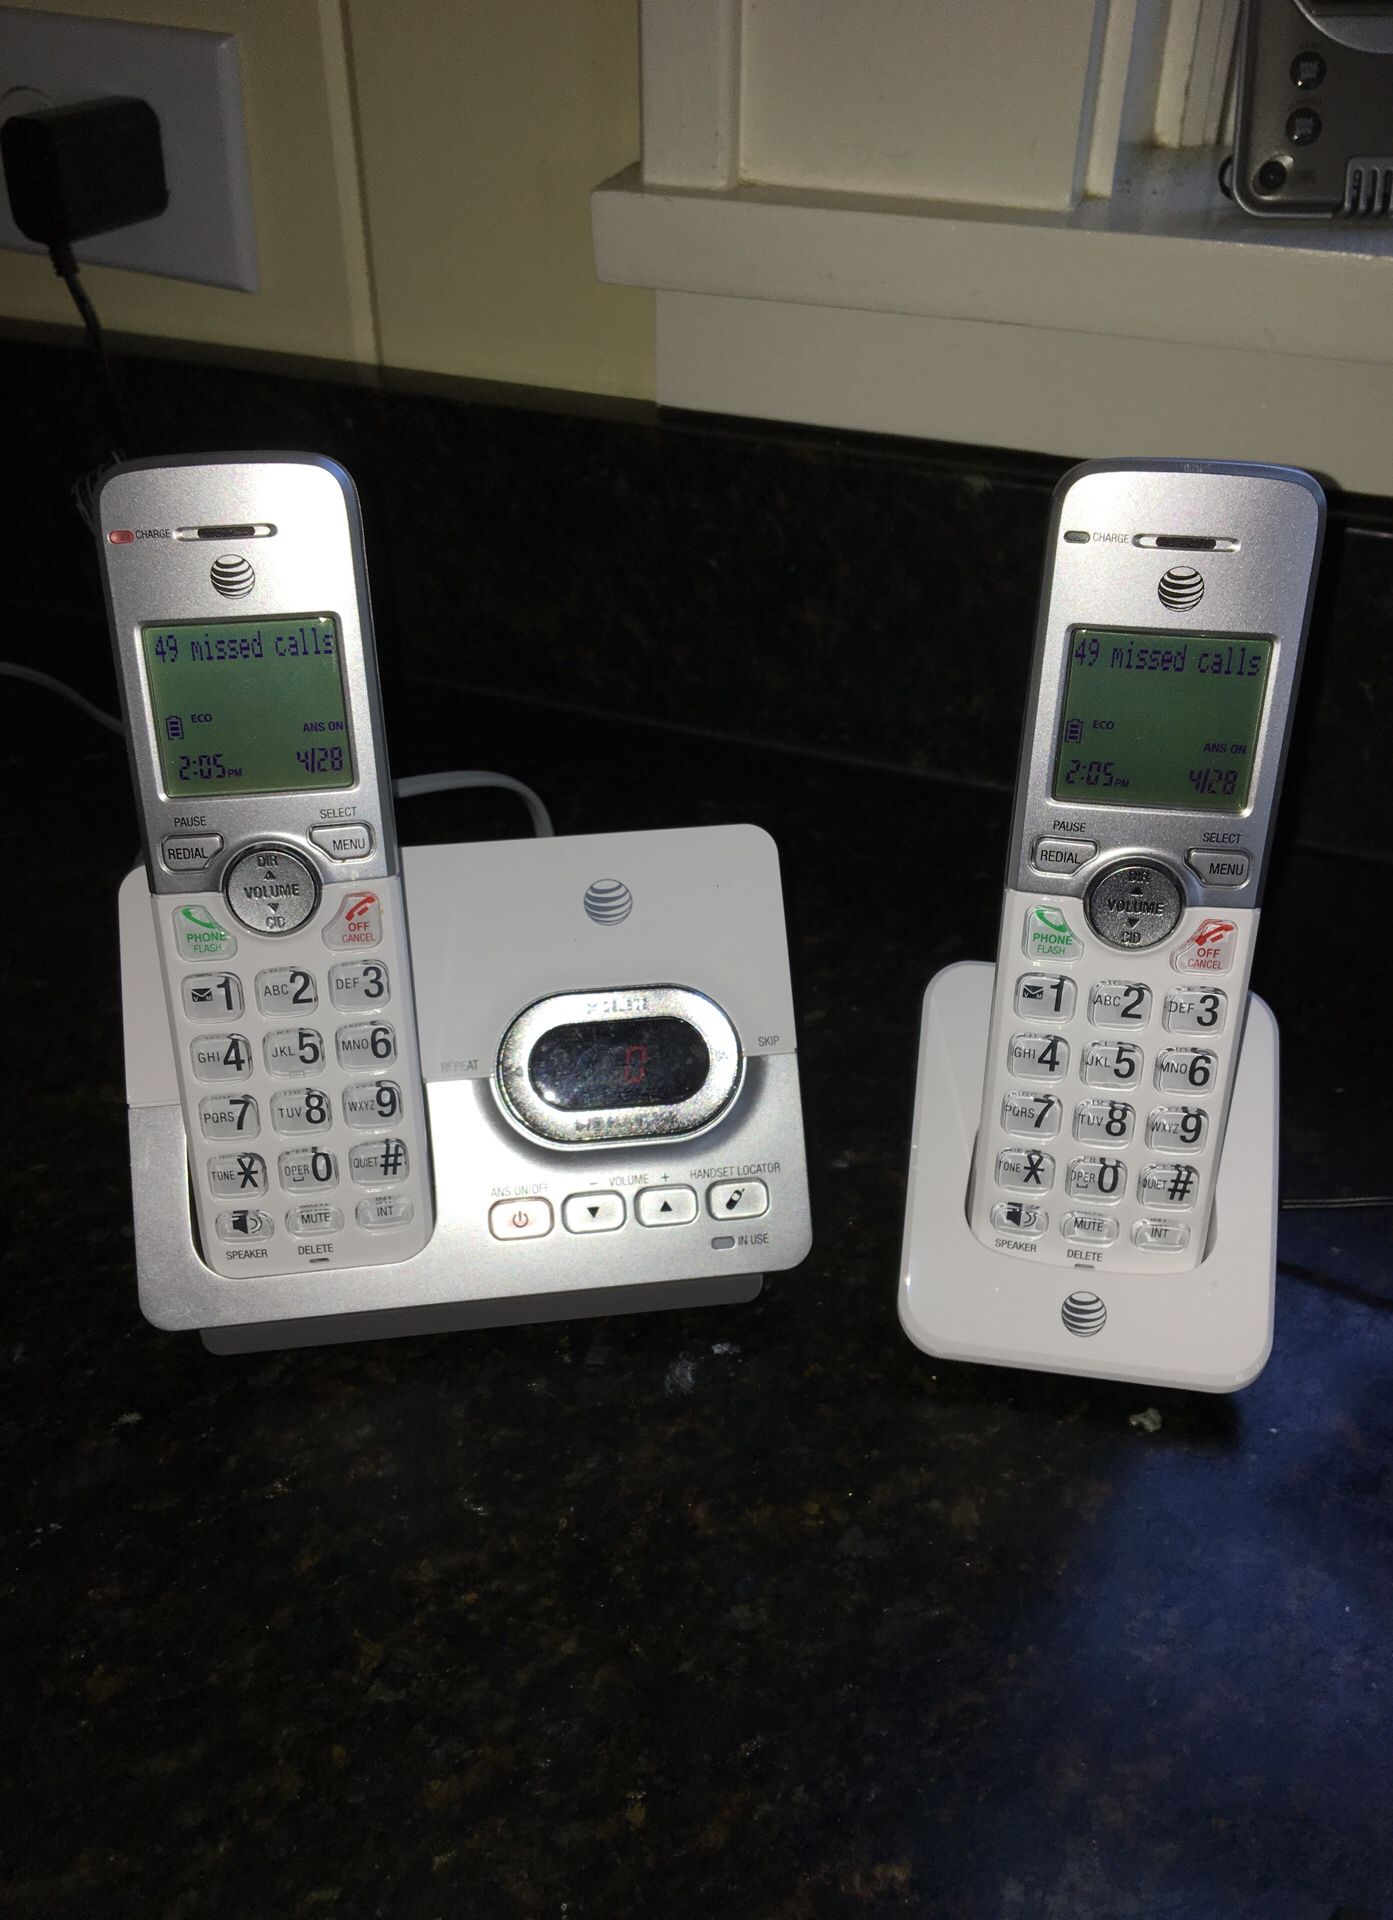 Telephone set with voice message recorder and cordless handsets